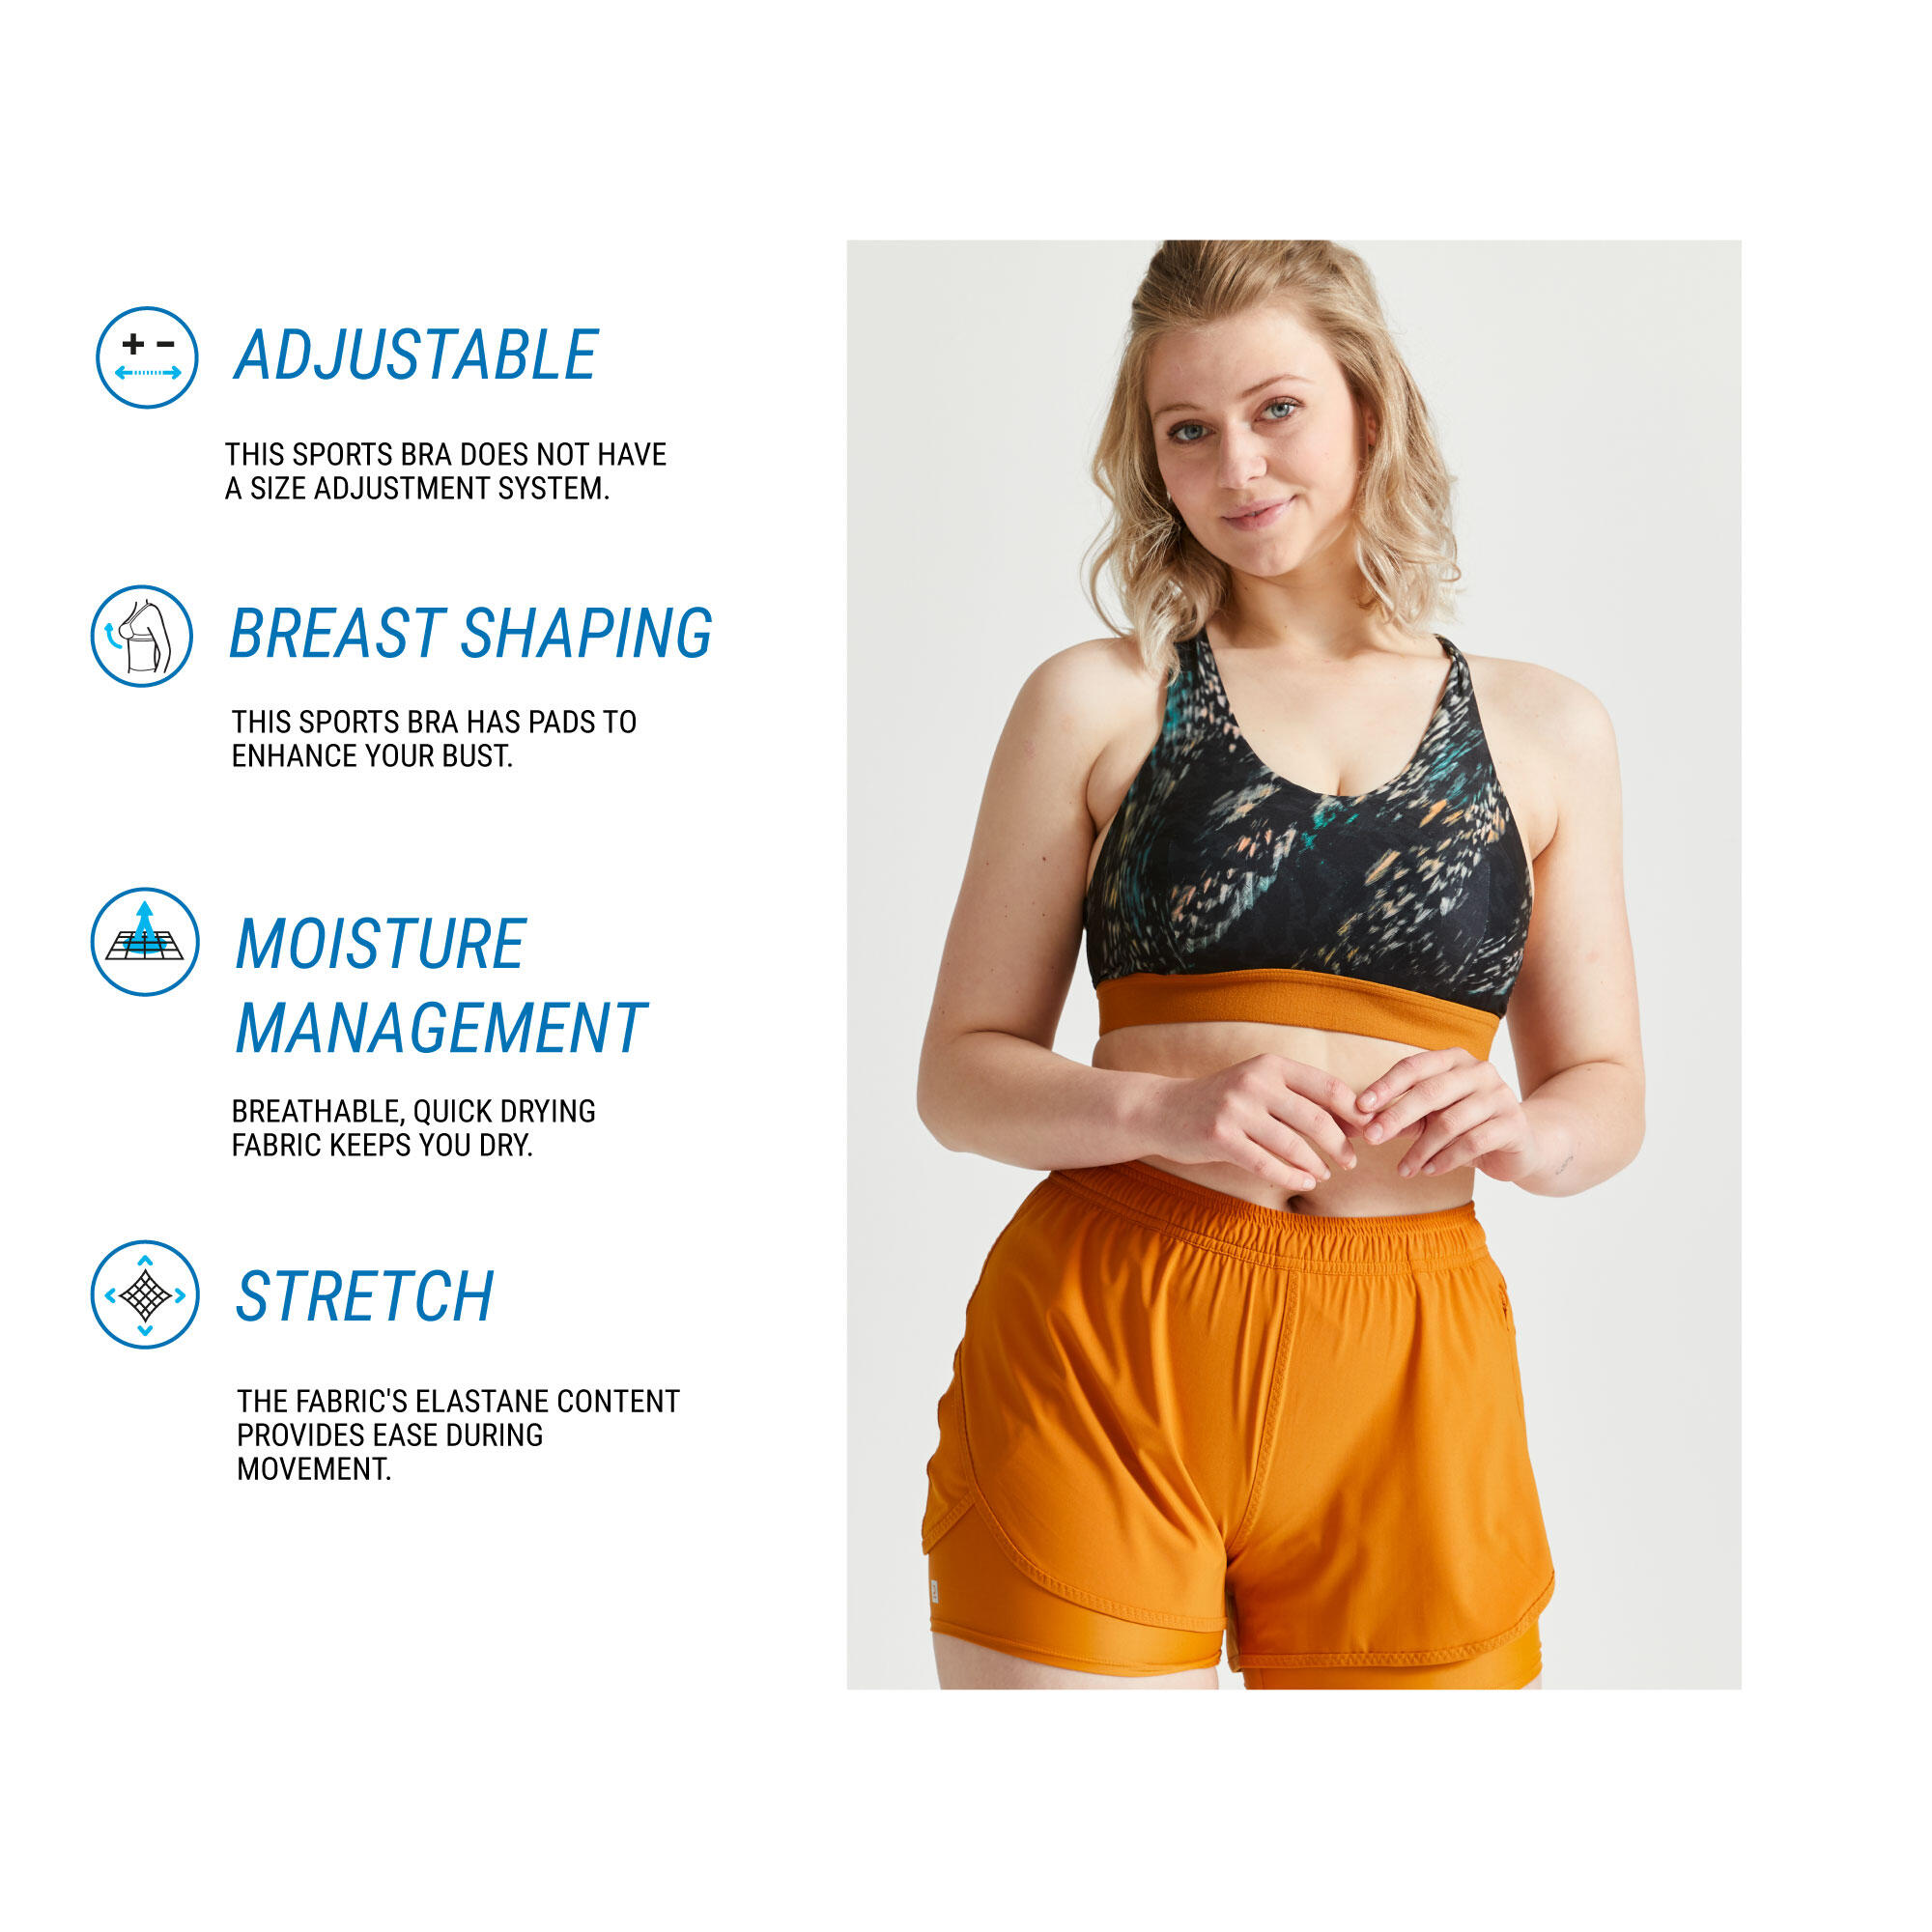 Which sports bra fabric is better for aerobics - cotton, nylon, or  polyester? - Quora